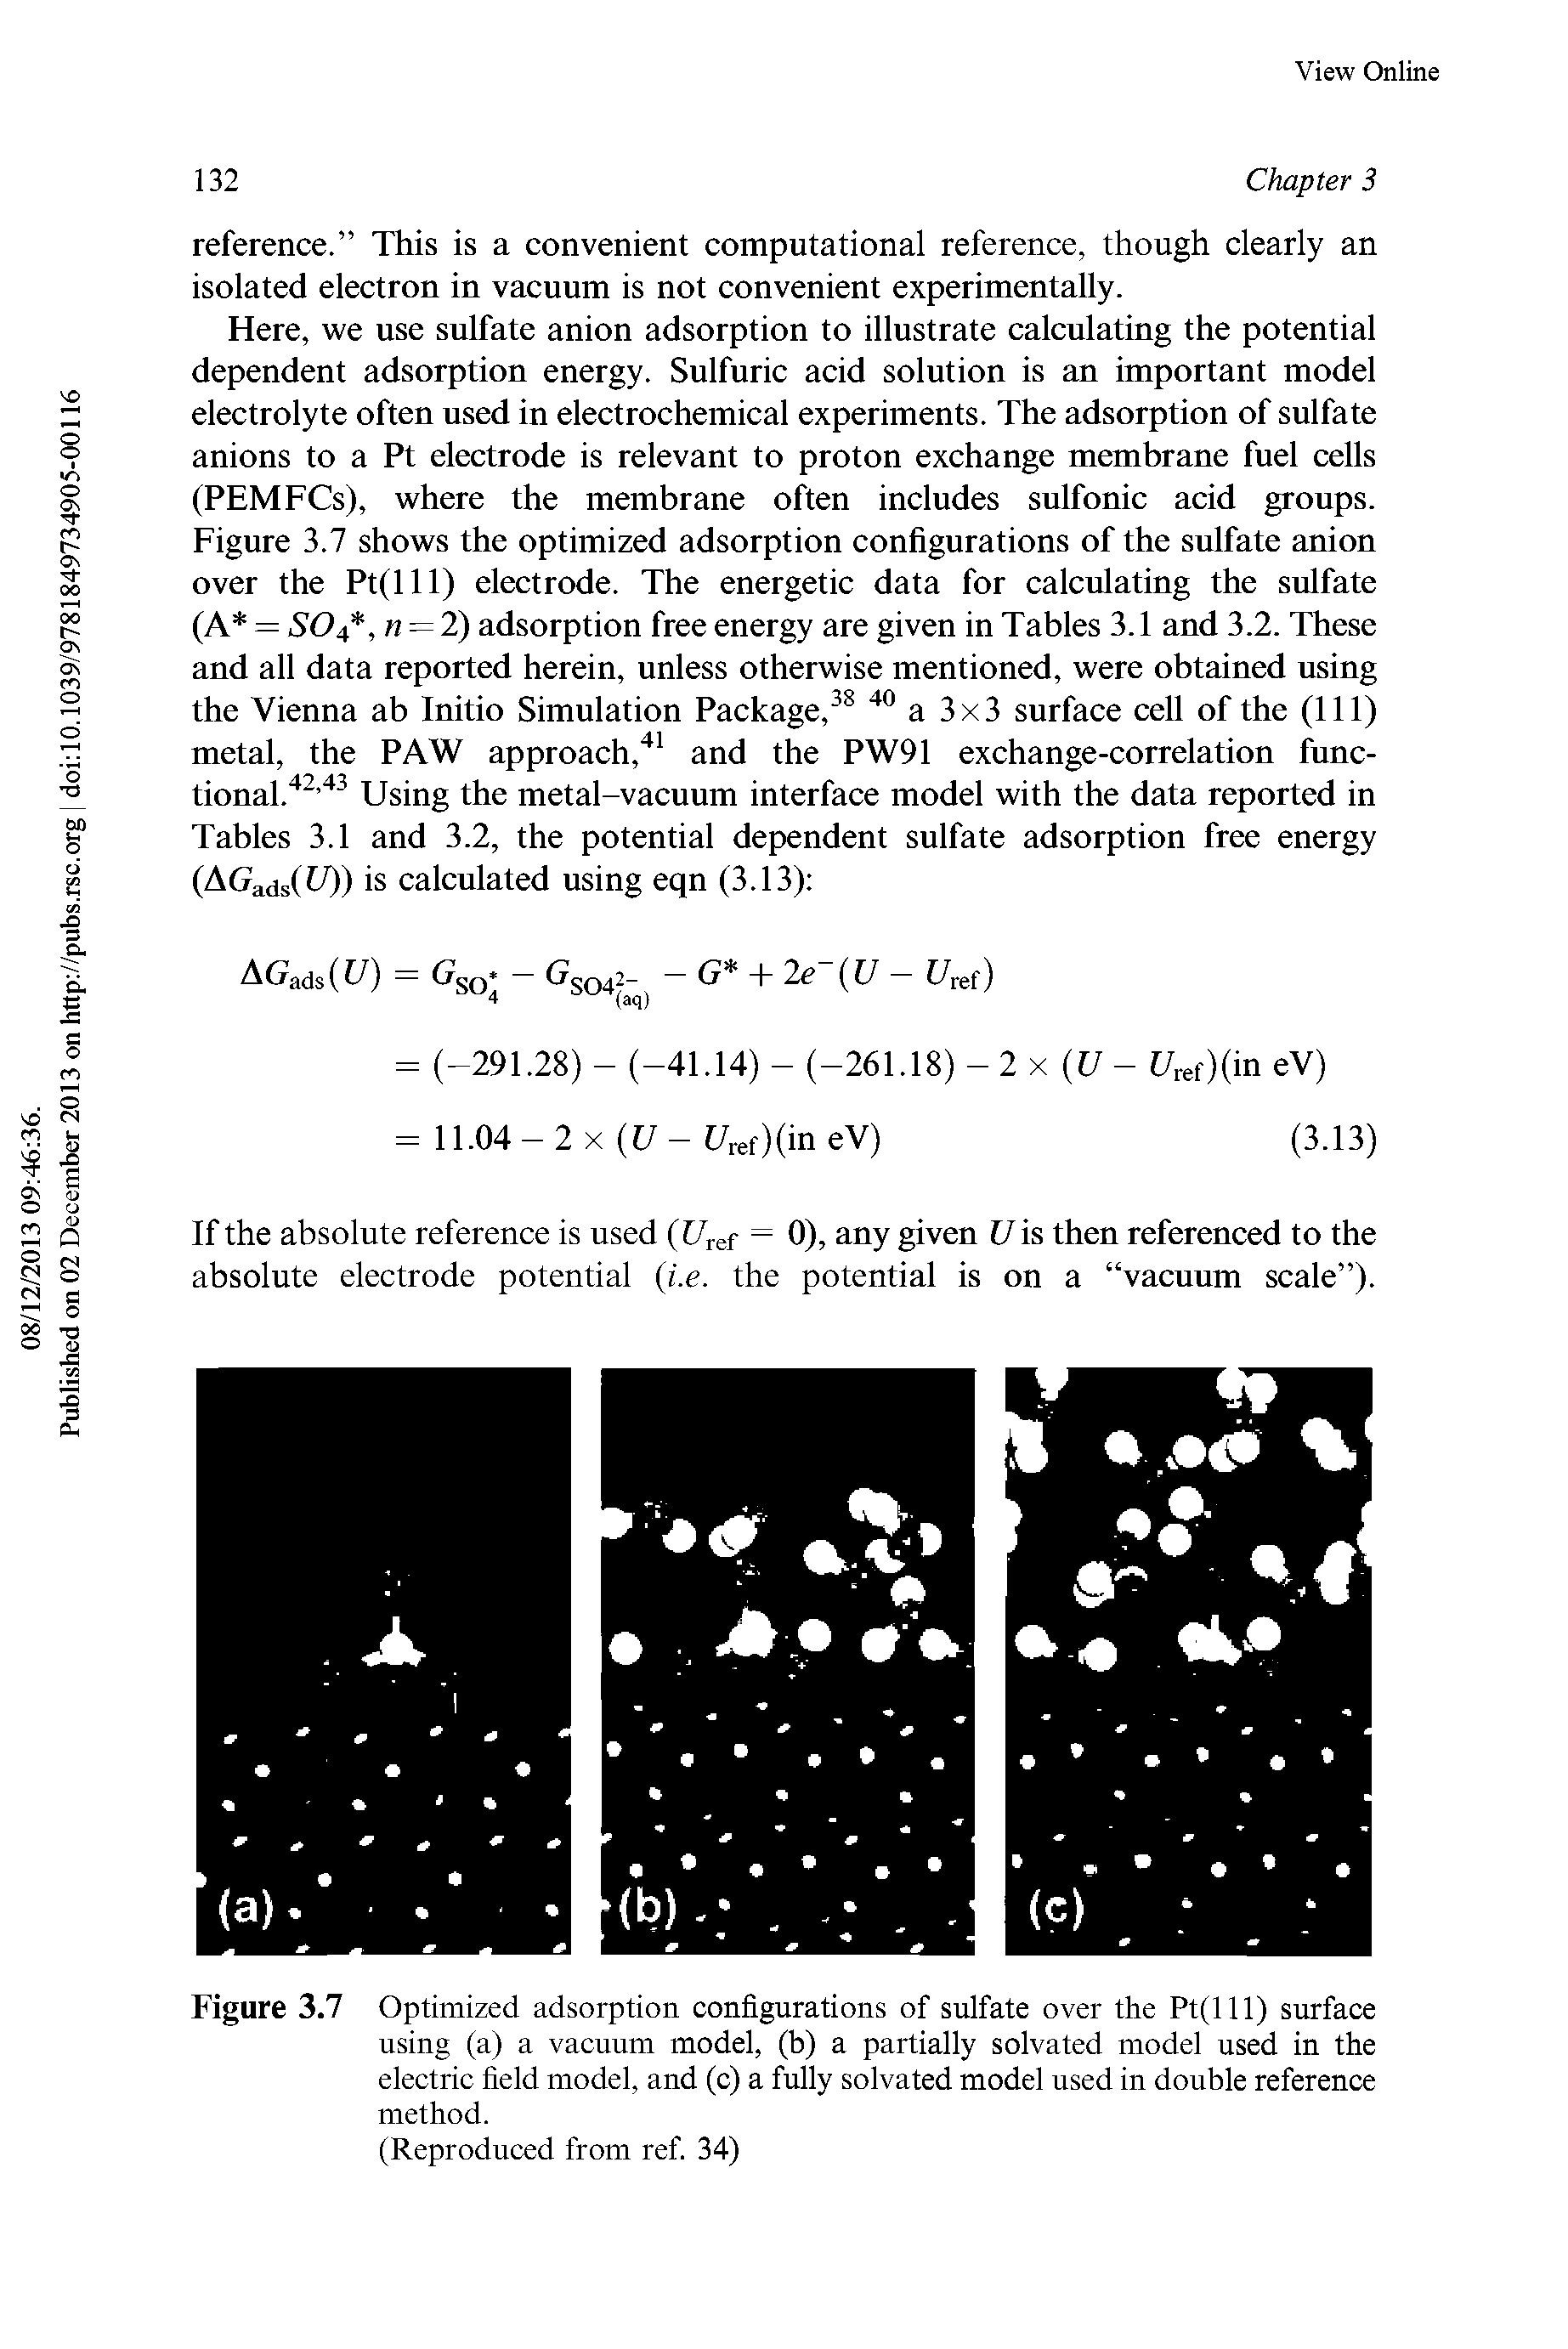 Figure 3.7 Optimized adsorption configurations of sulfate over the Pt(lll) surface using (a) a vacuum model, (b) a partially solvated model used in the electric field model, and (c) a fully solvated model used in double reference method.